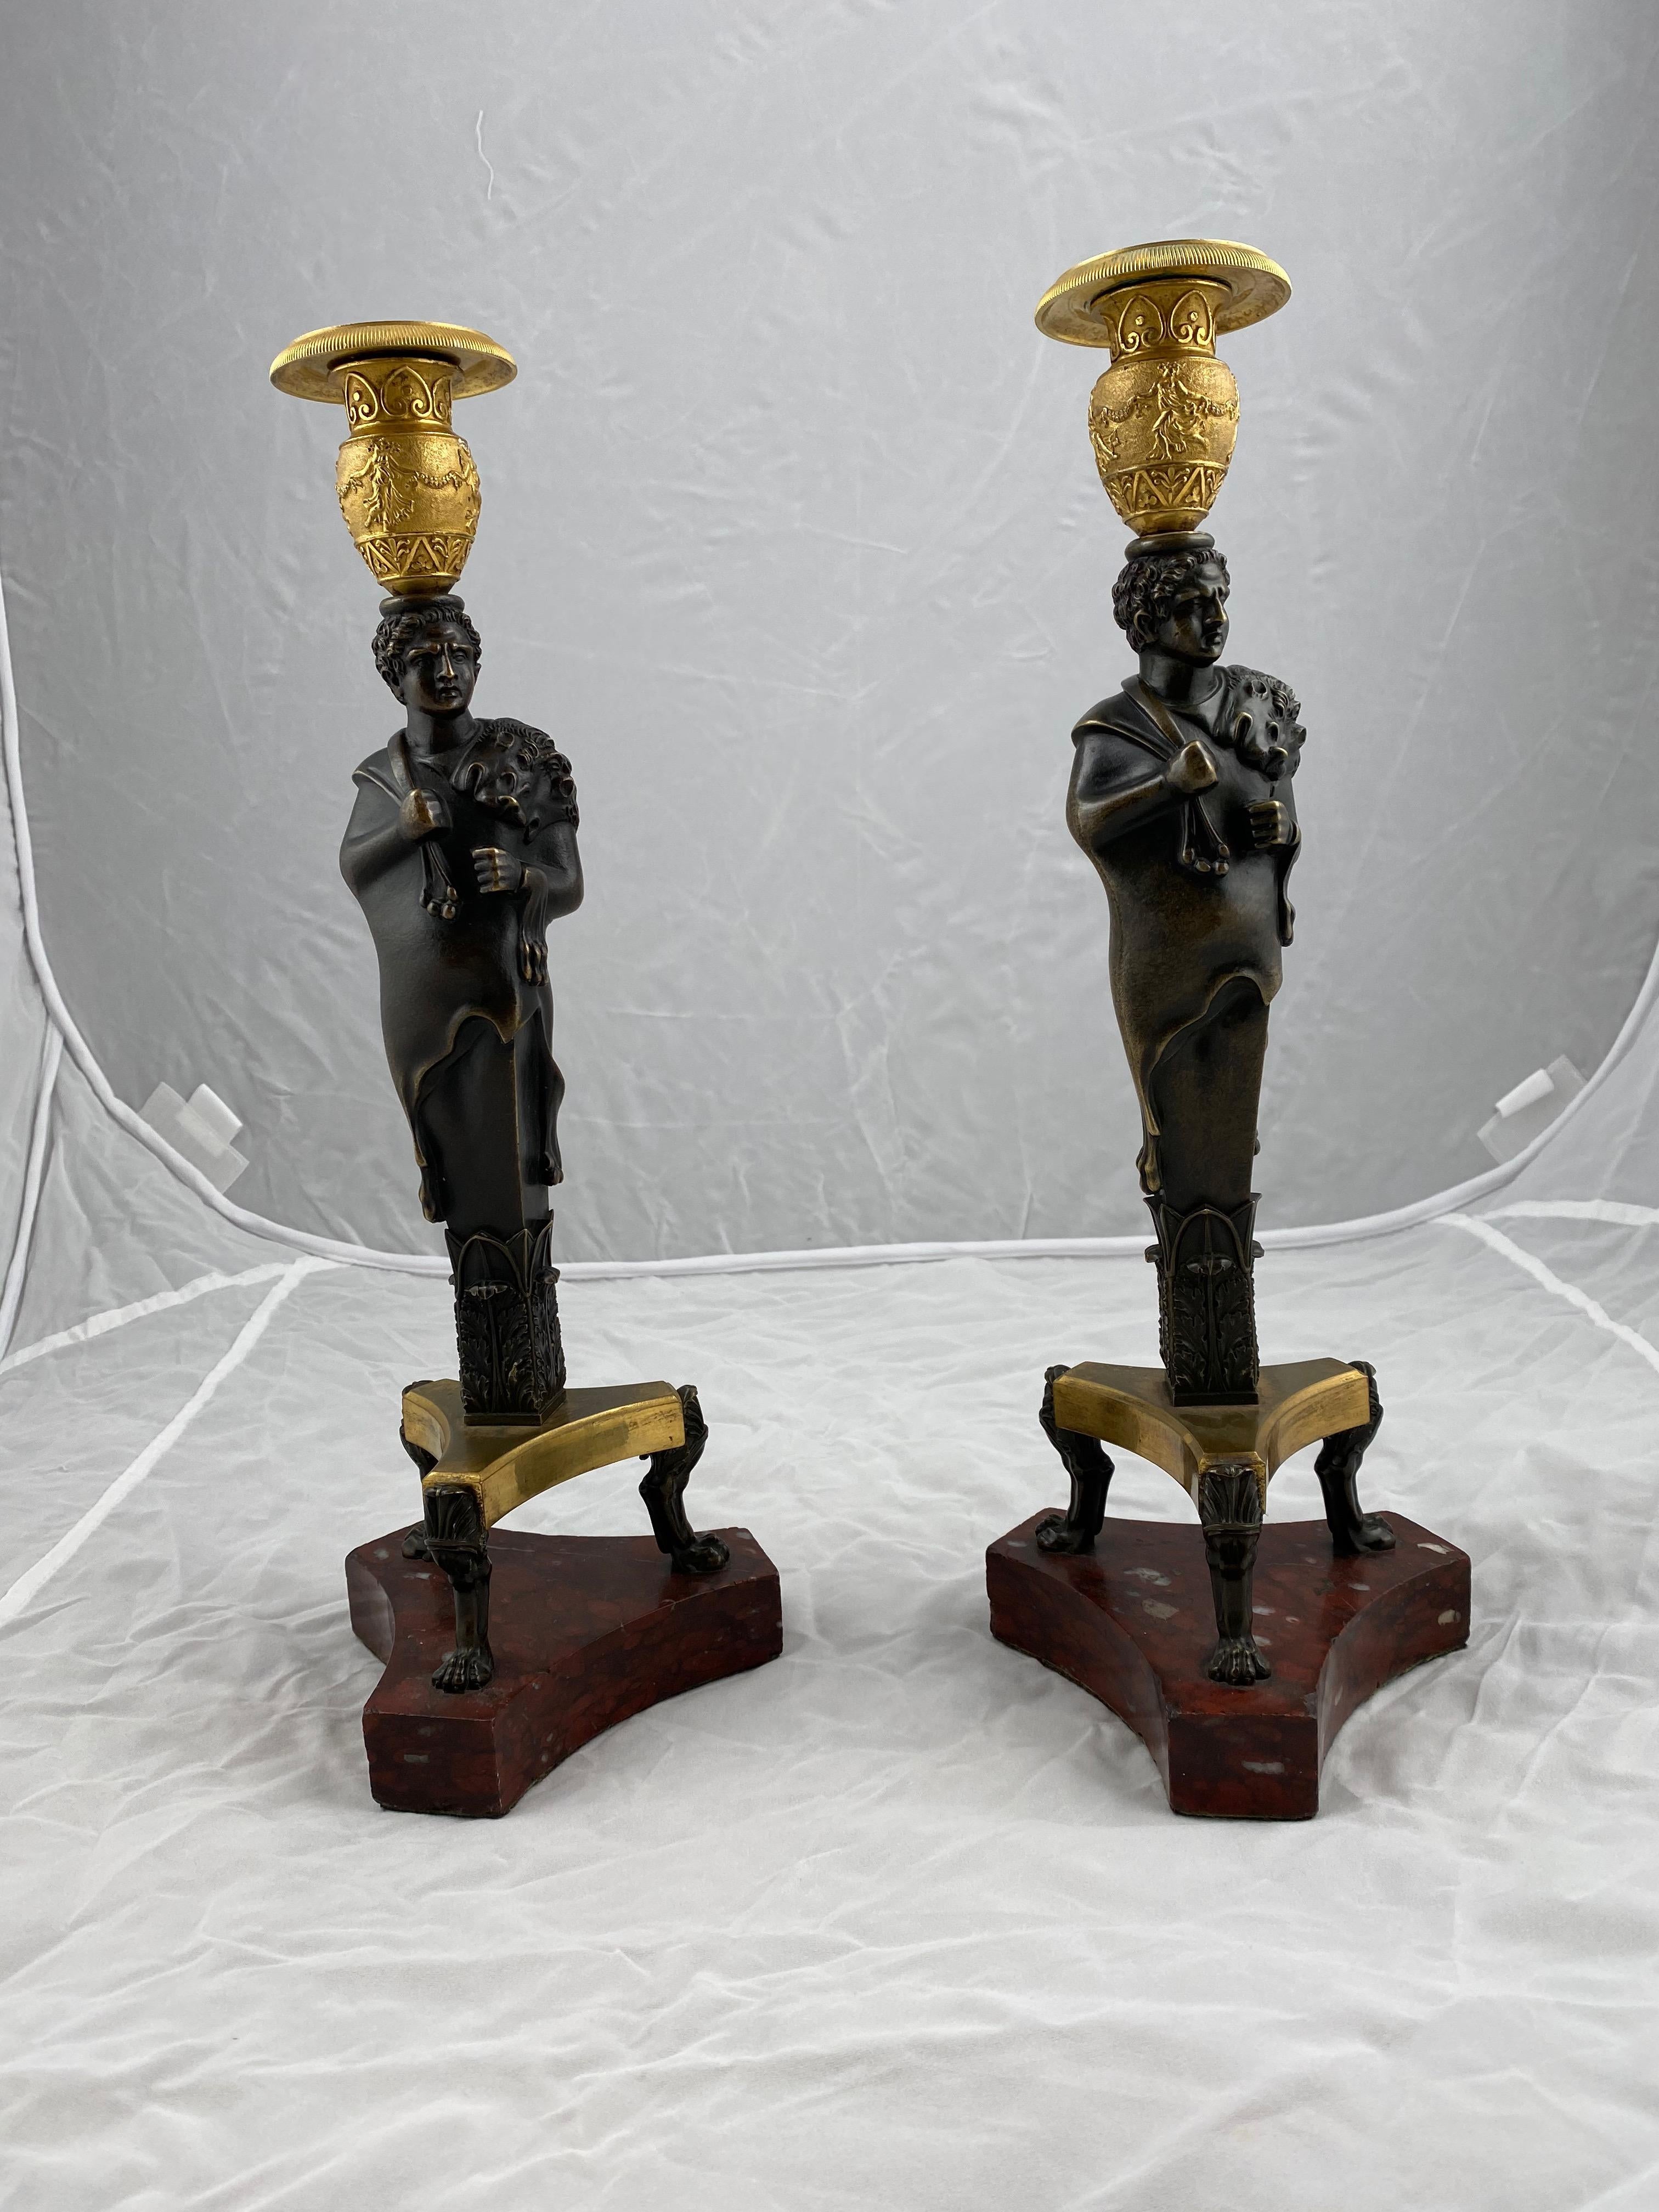 A magnificent large pair of candlesticks. The central part is made of dark patinated bronce. Napoleon depicted as Hercules, the Greek half god shown with a lion skin on his shoulder. The bases of red marble with cast bronce feet in the shape of lion